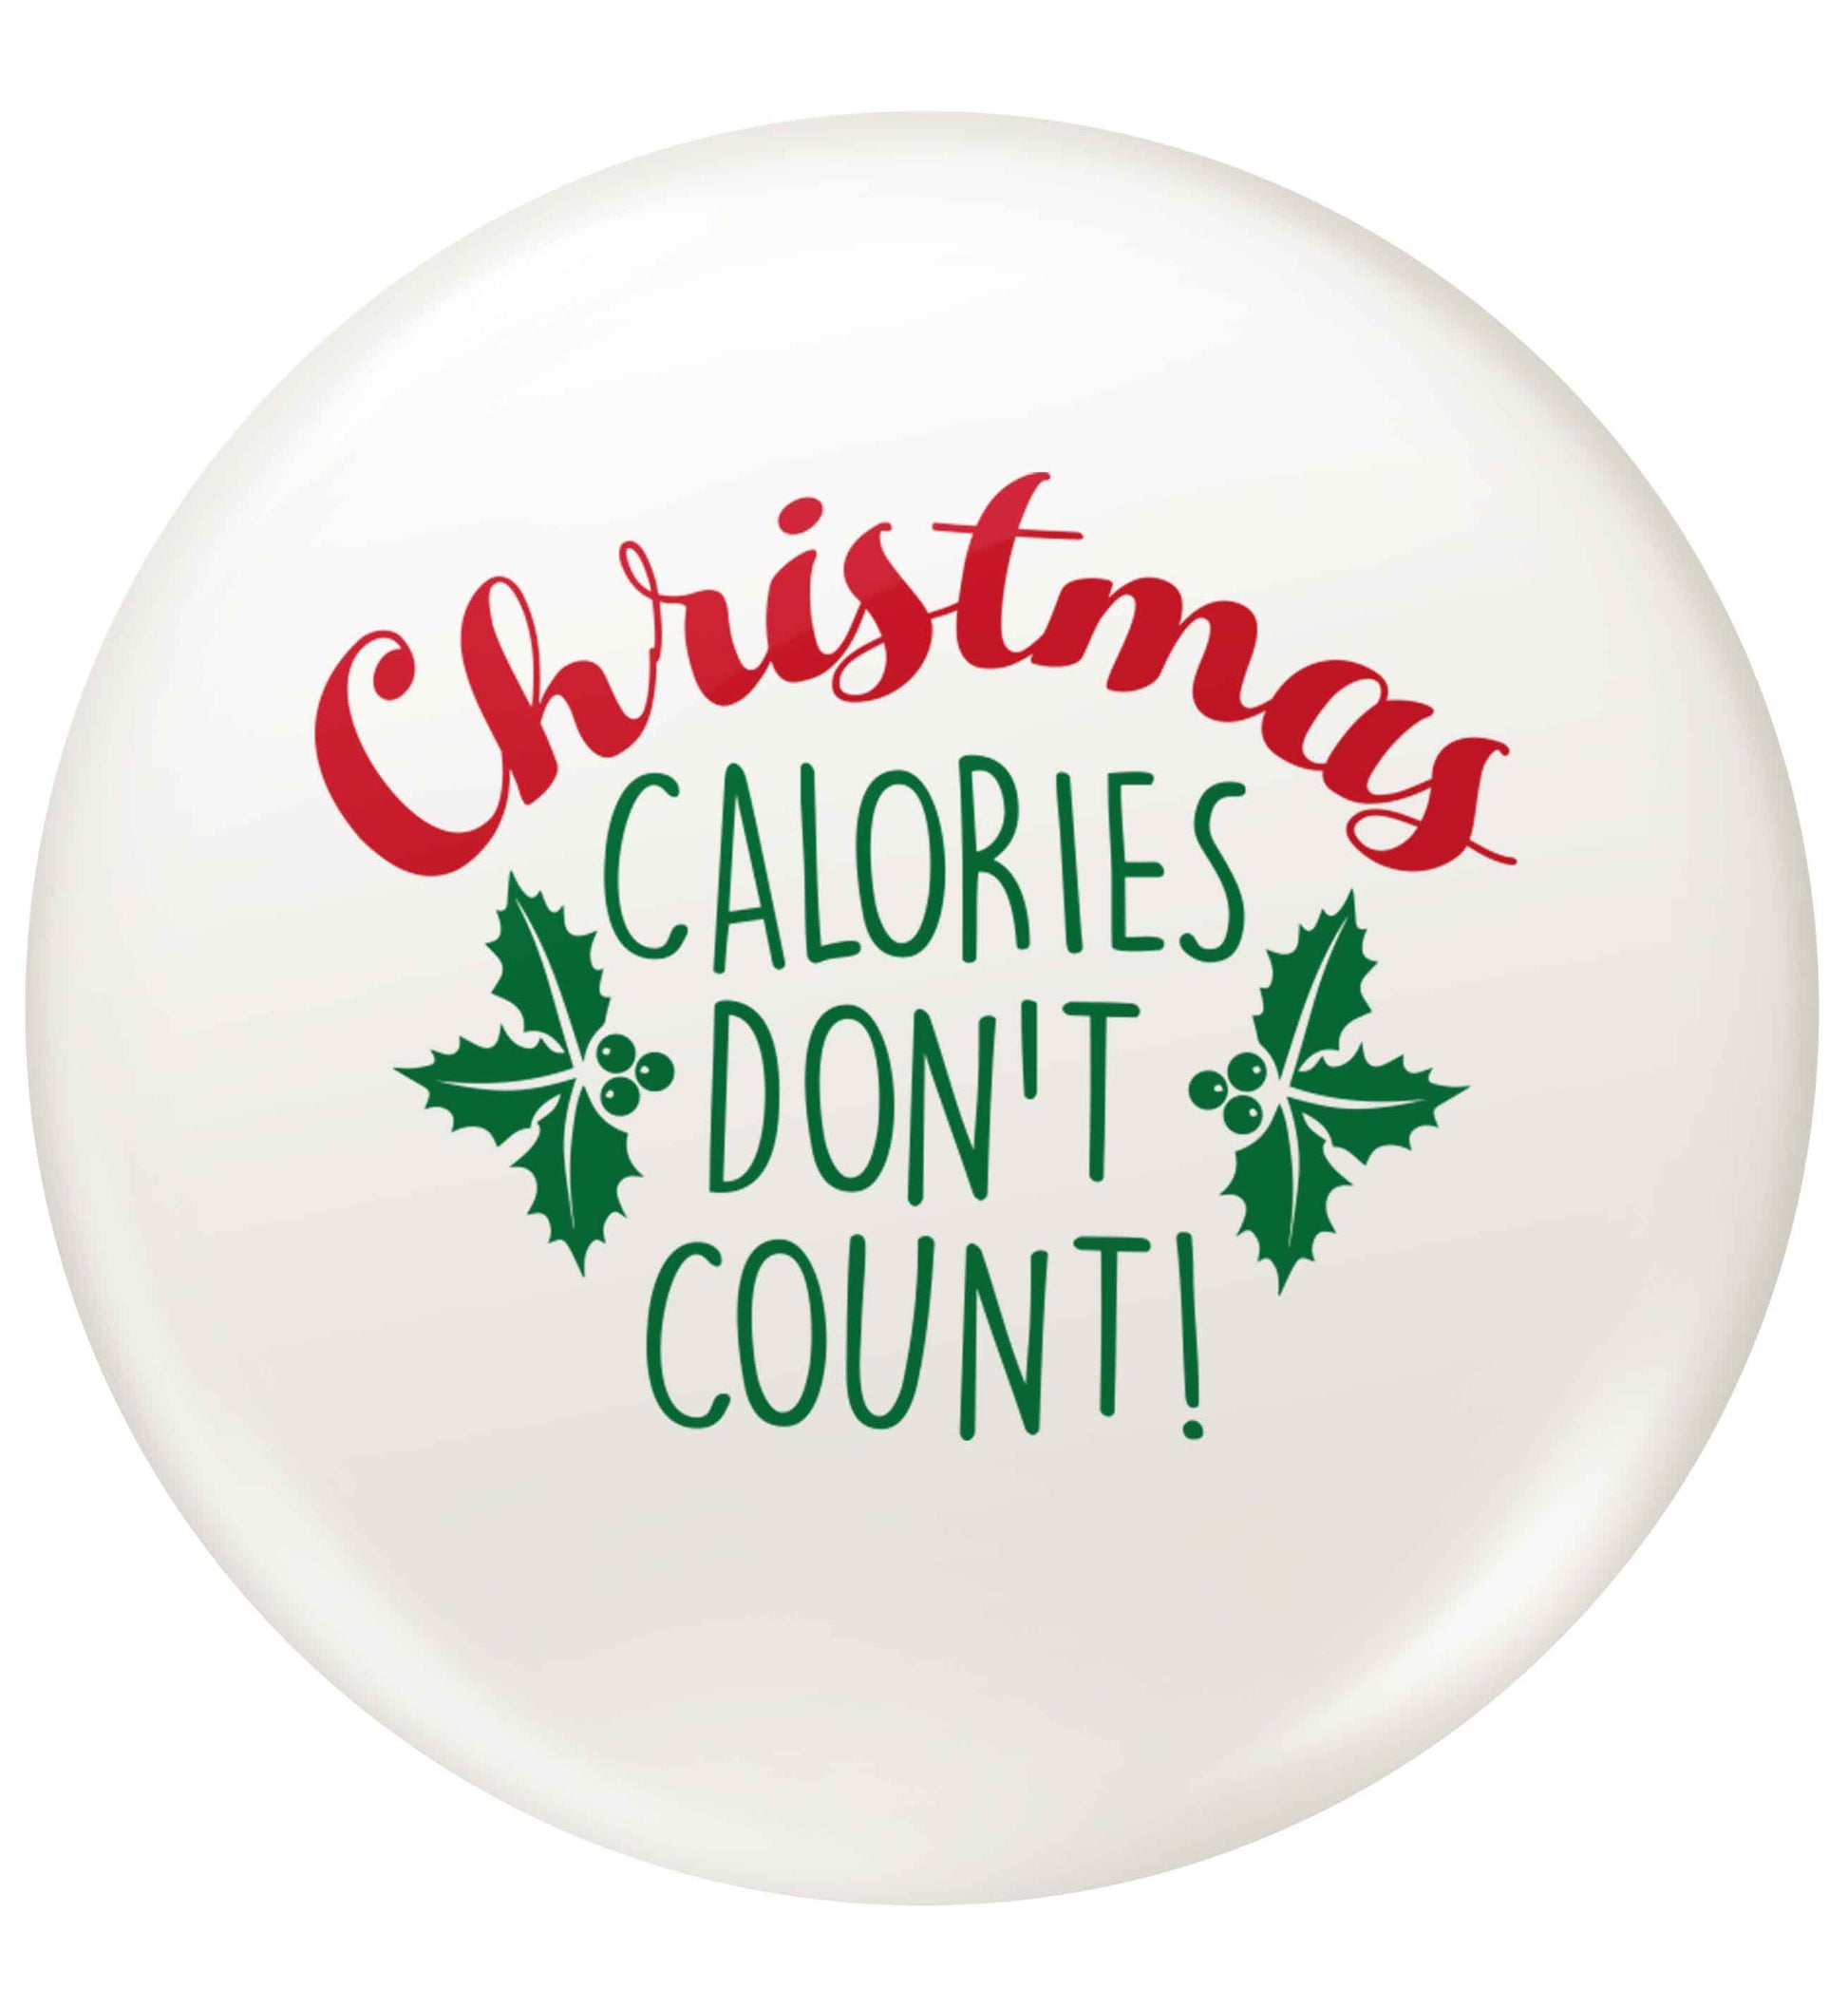 Christmas calories don't count small 25mm Pin badge